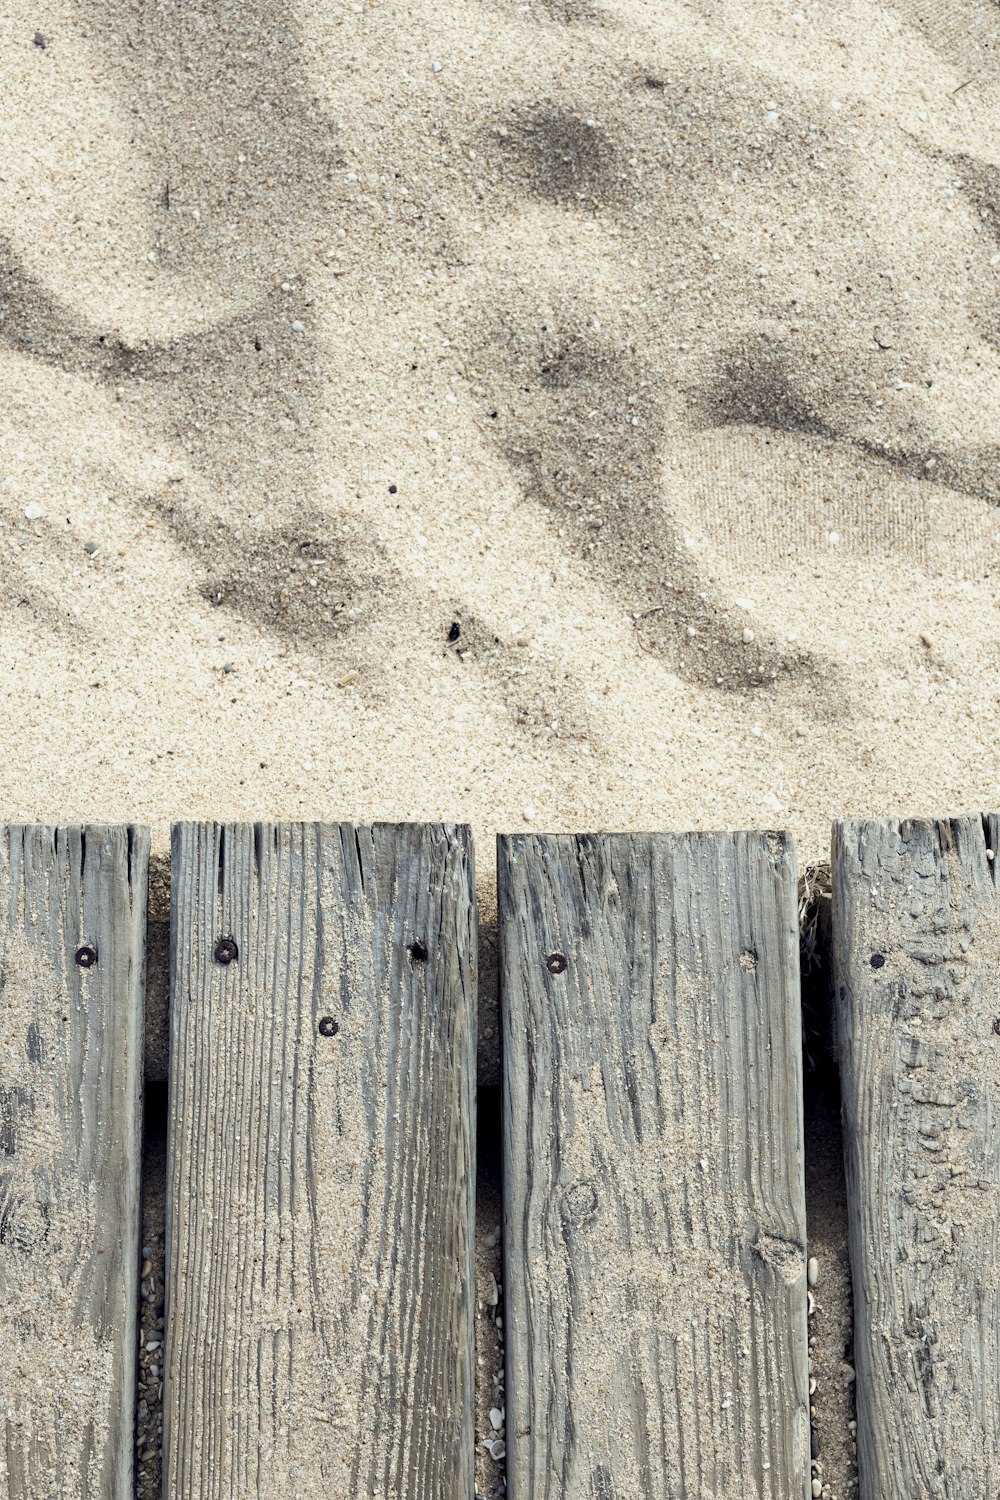 a bird is standing on a wooden plank in the sand